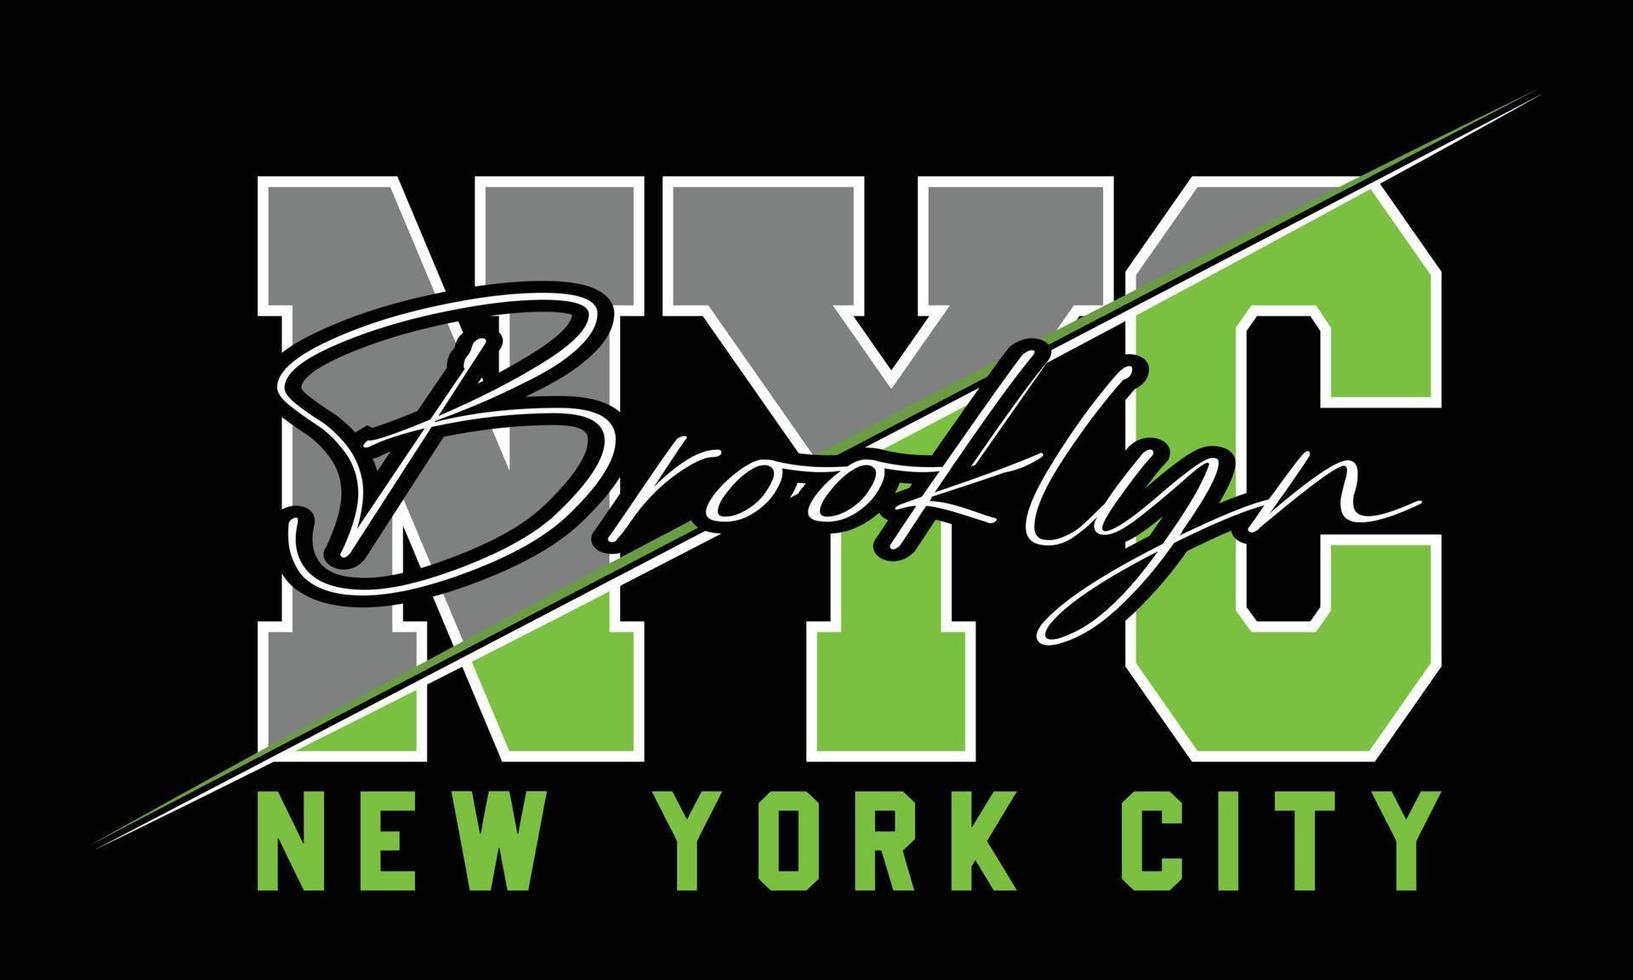 New York City, NYC Typography t-shirt design. Motivational New York City Typography t-shirt Creative Kids, and NYC Theme Vector Illustration.